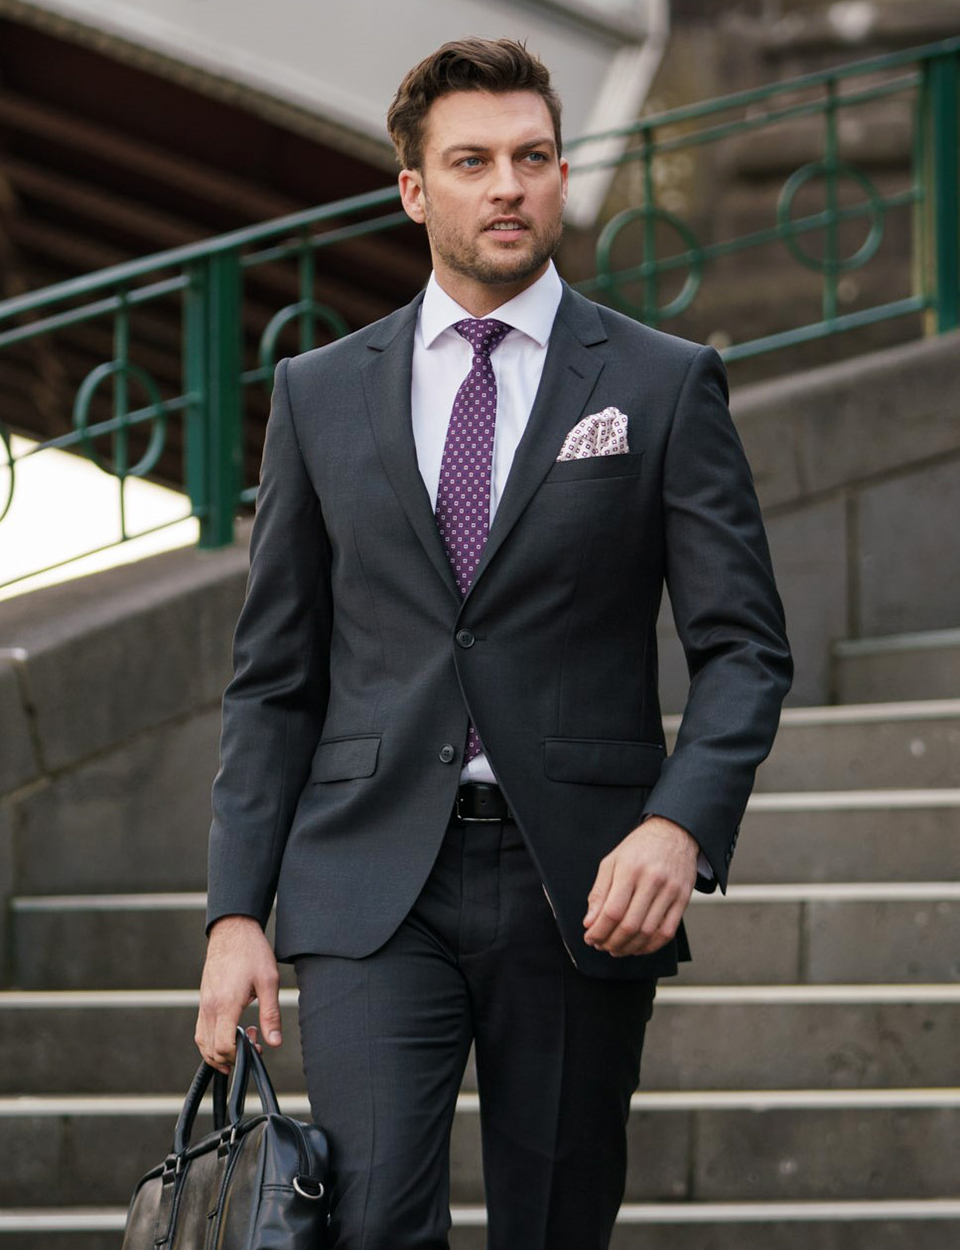 matching a charcoal wool suit with a purple tie for versatility